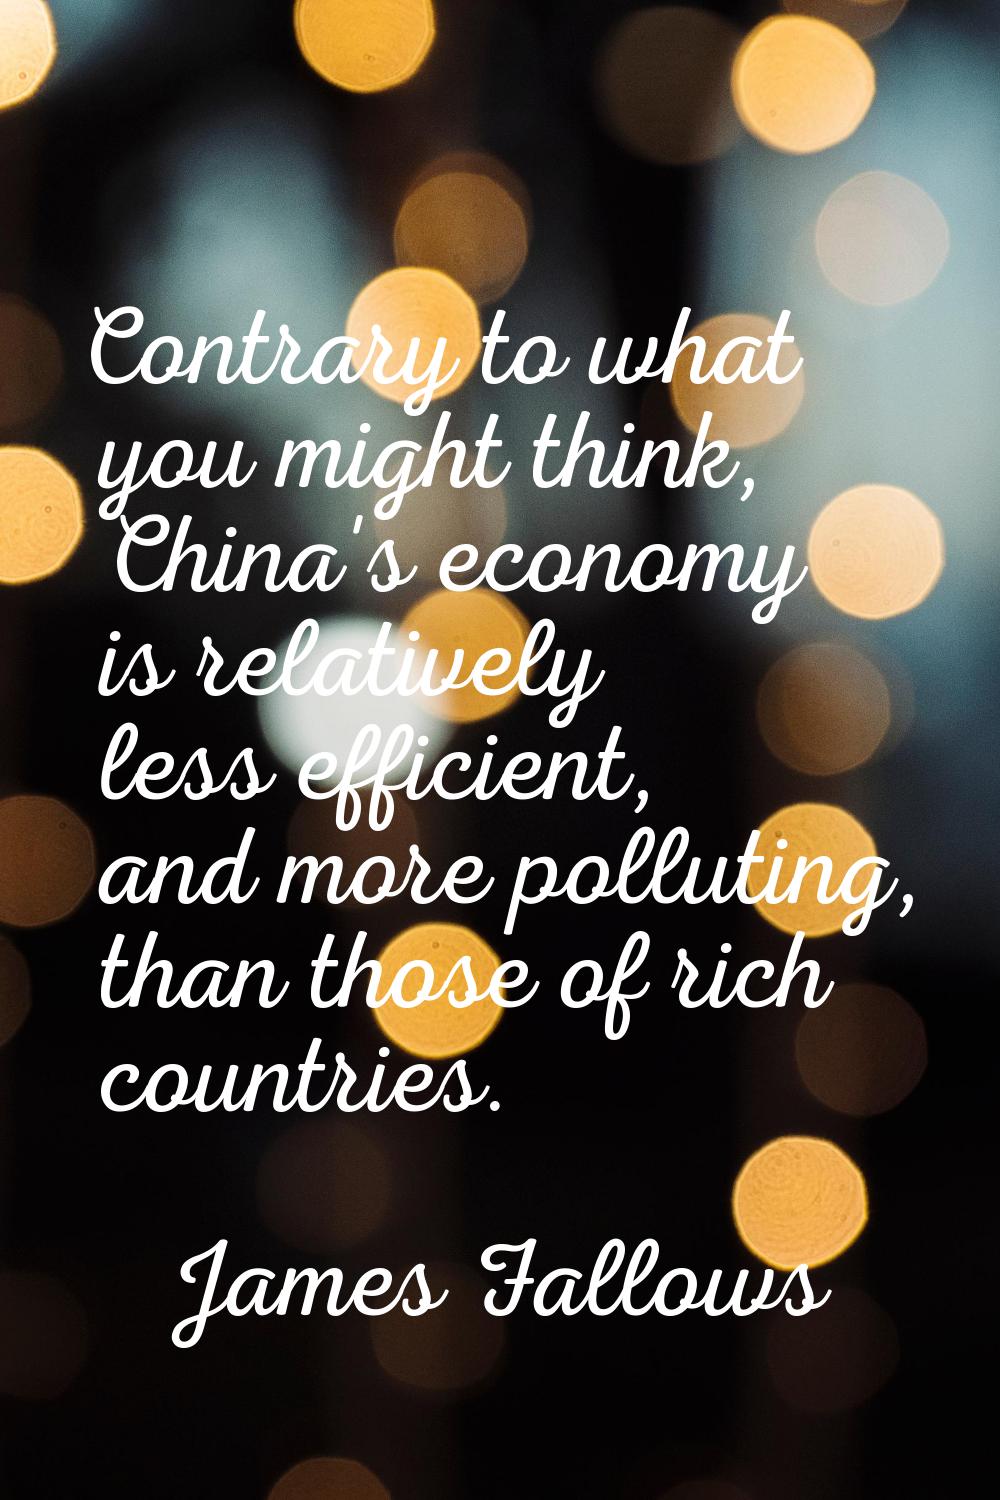 Contrary to what you might think, China's economy is relatively less efficient, and more polluting,